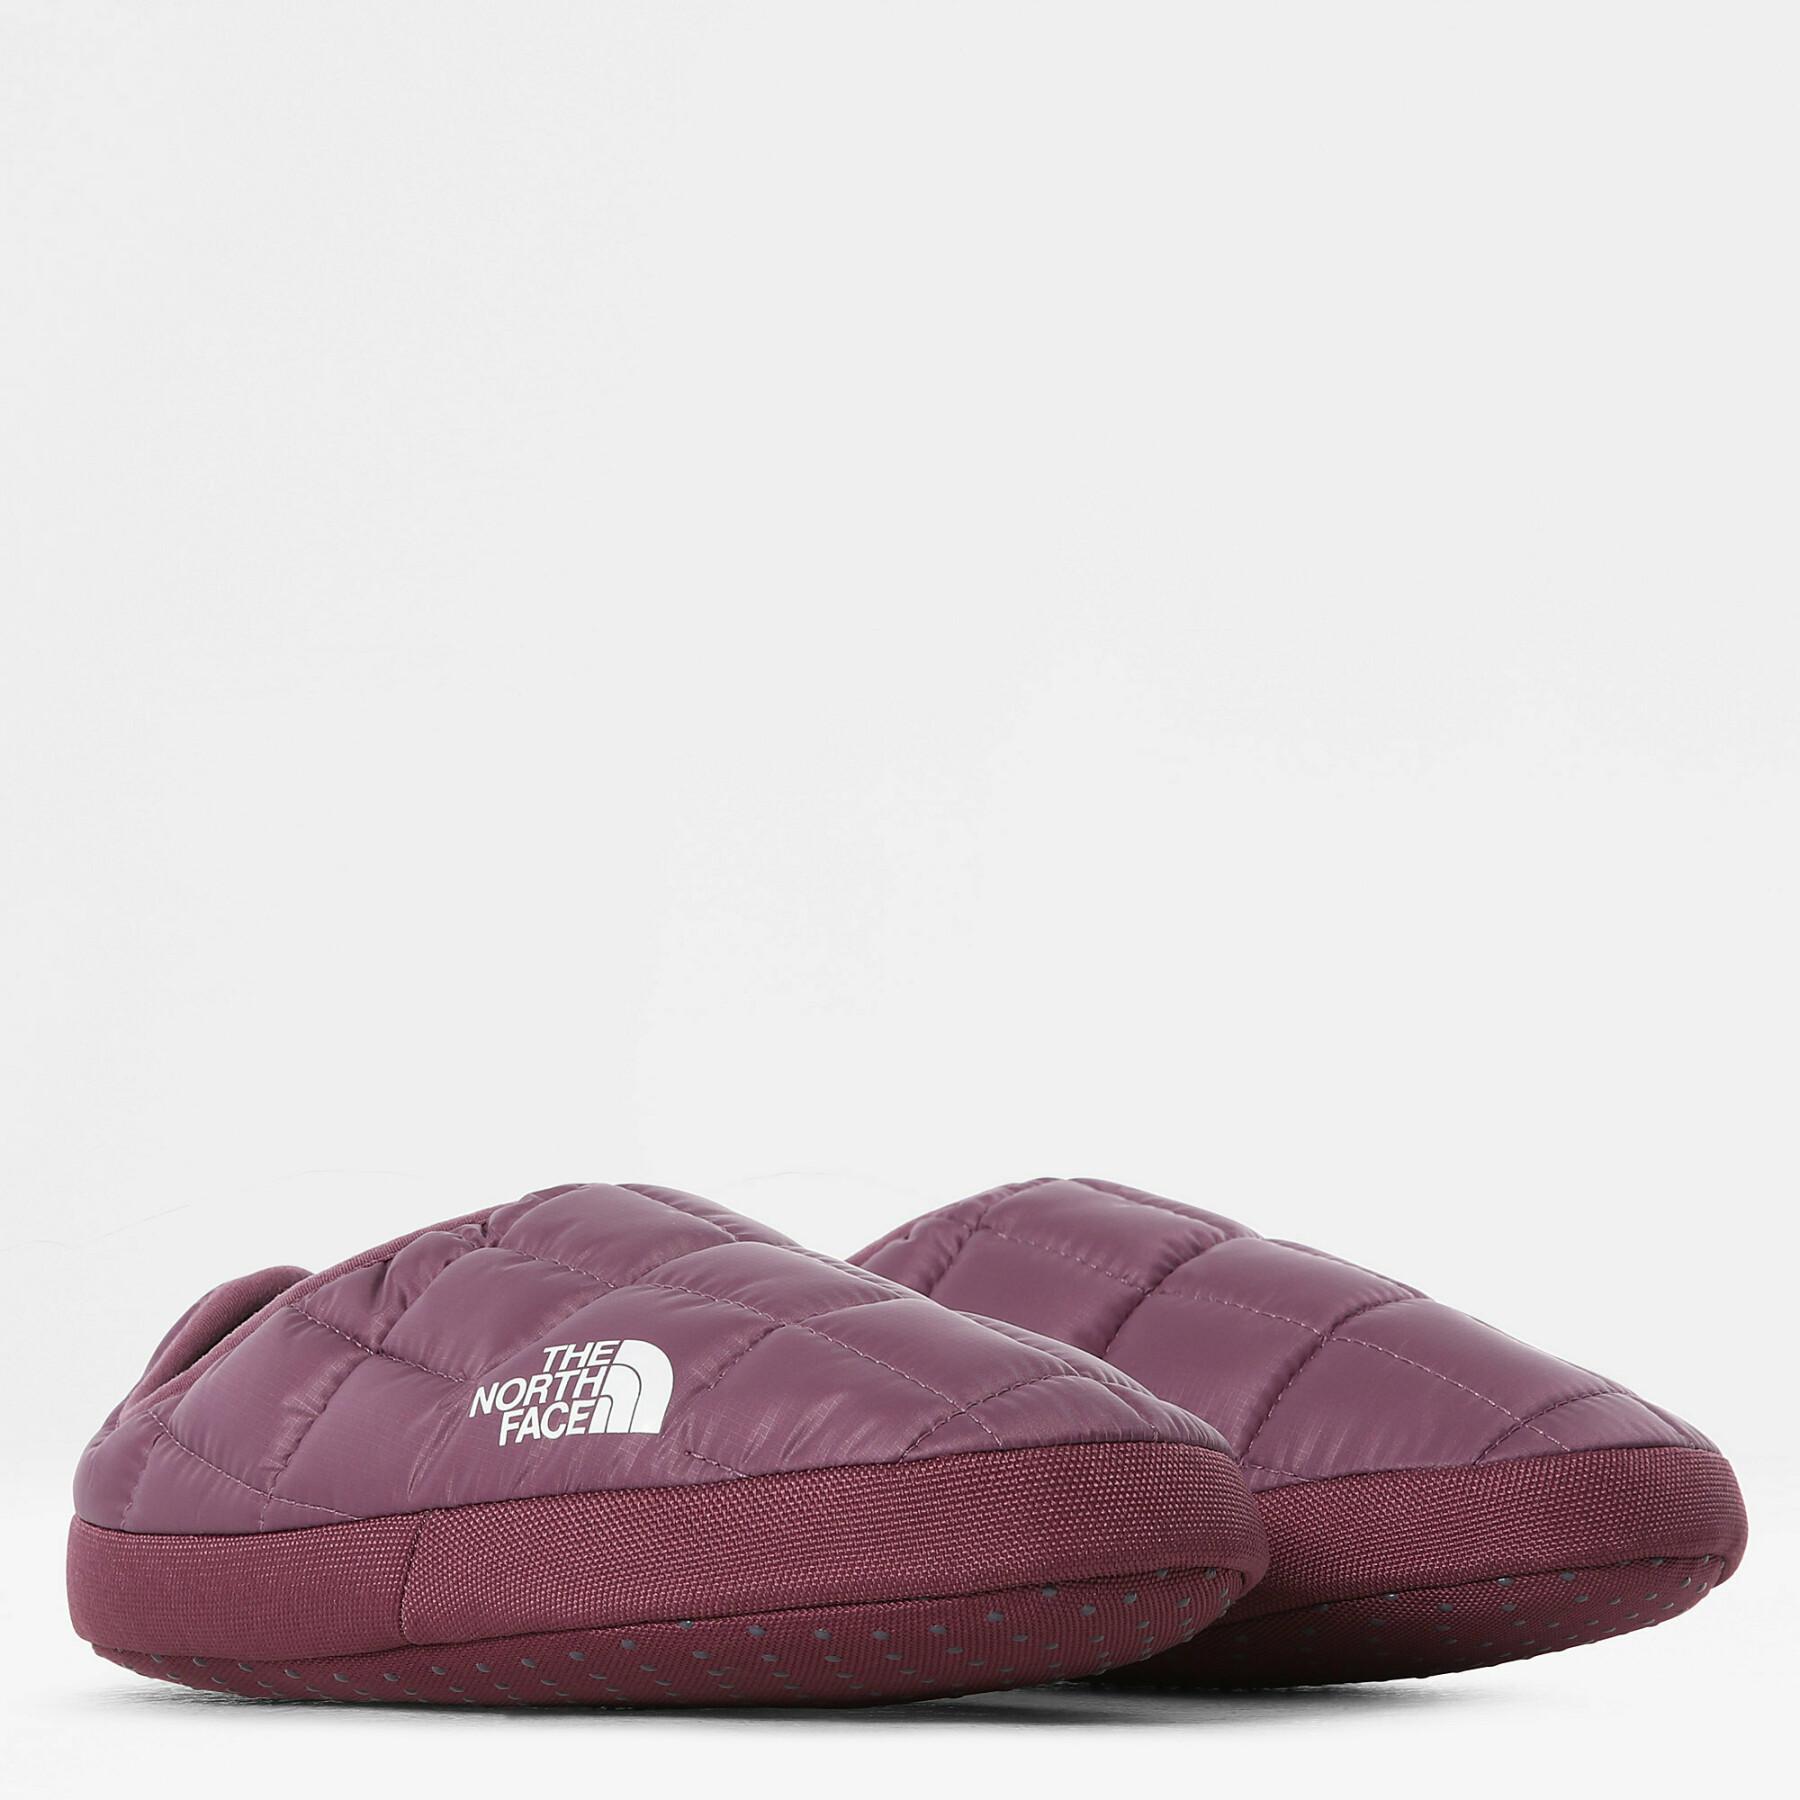 Pantofole da donna The North Face Thermoball Tent V